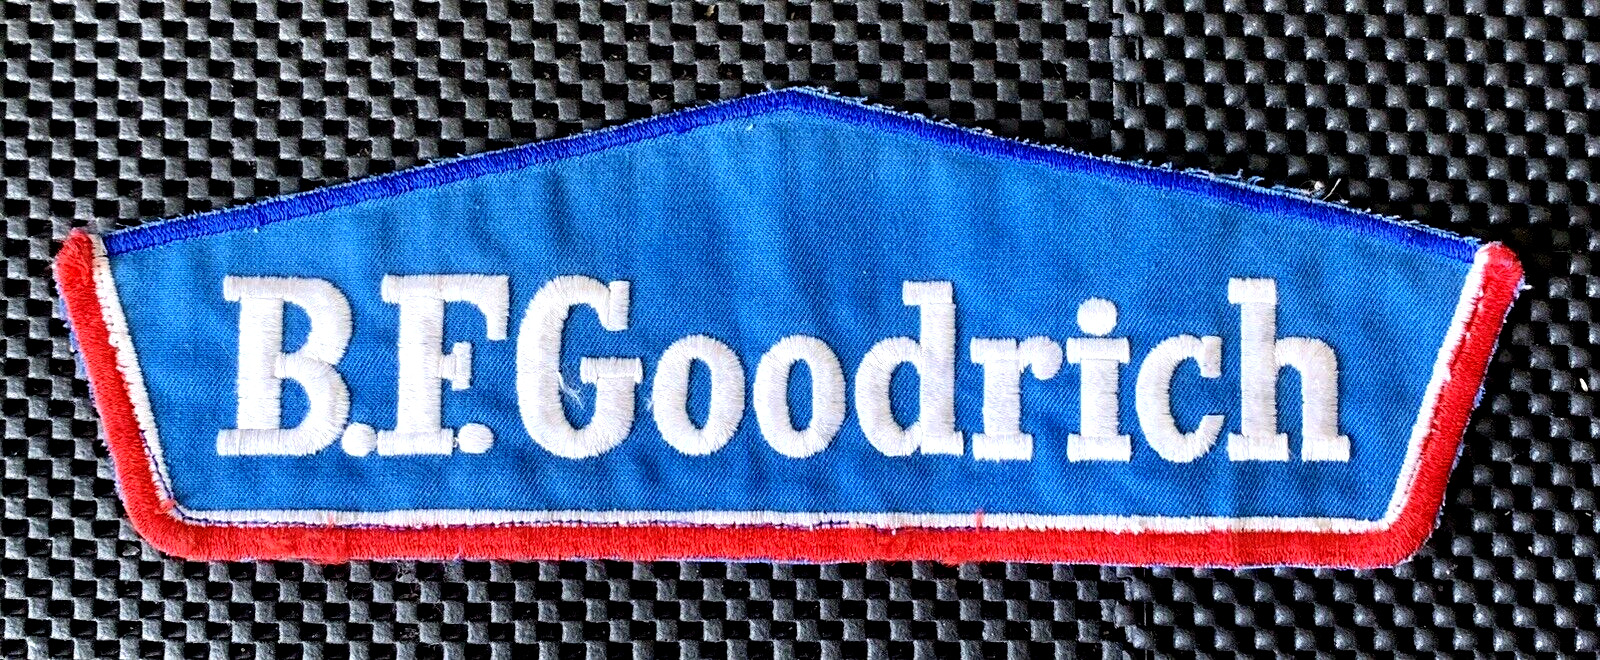 BF GOODRICH LARGE EMBROIDERED SEW ON ONLY PATCH AUTO TRUCK TIRES 11\